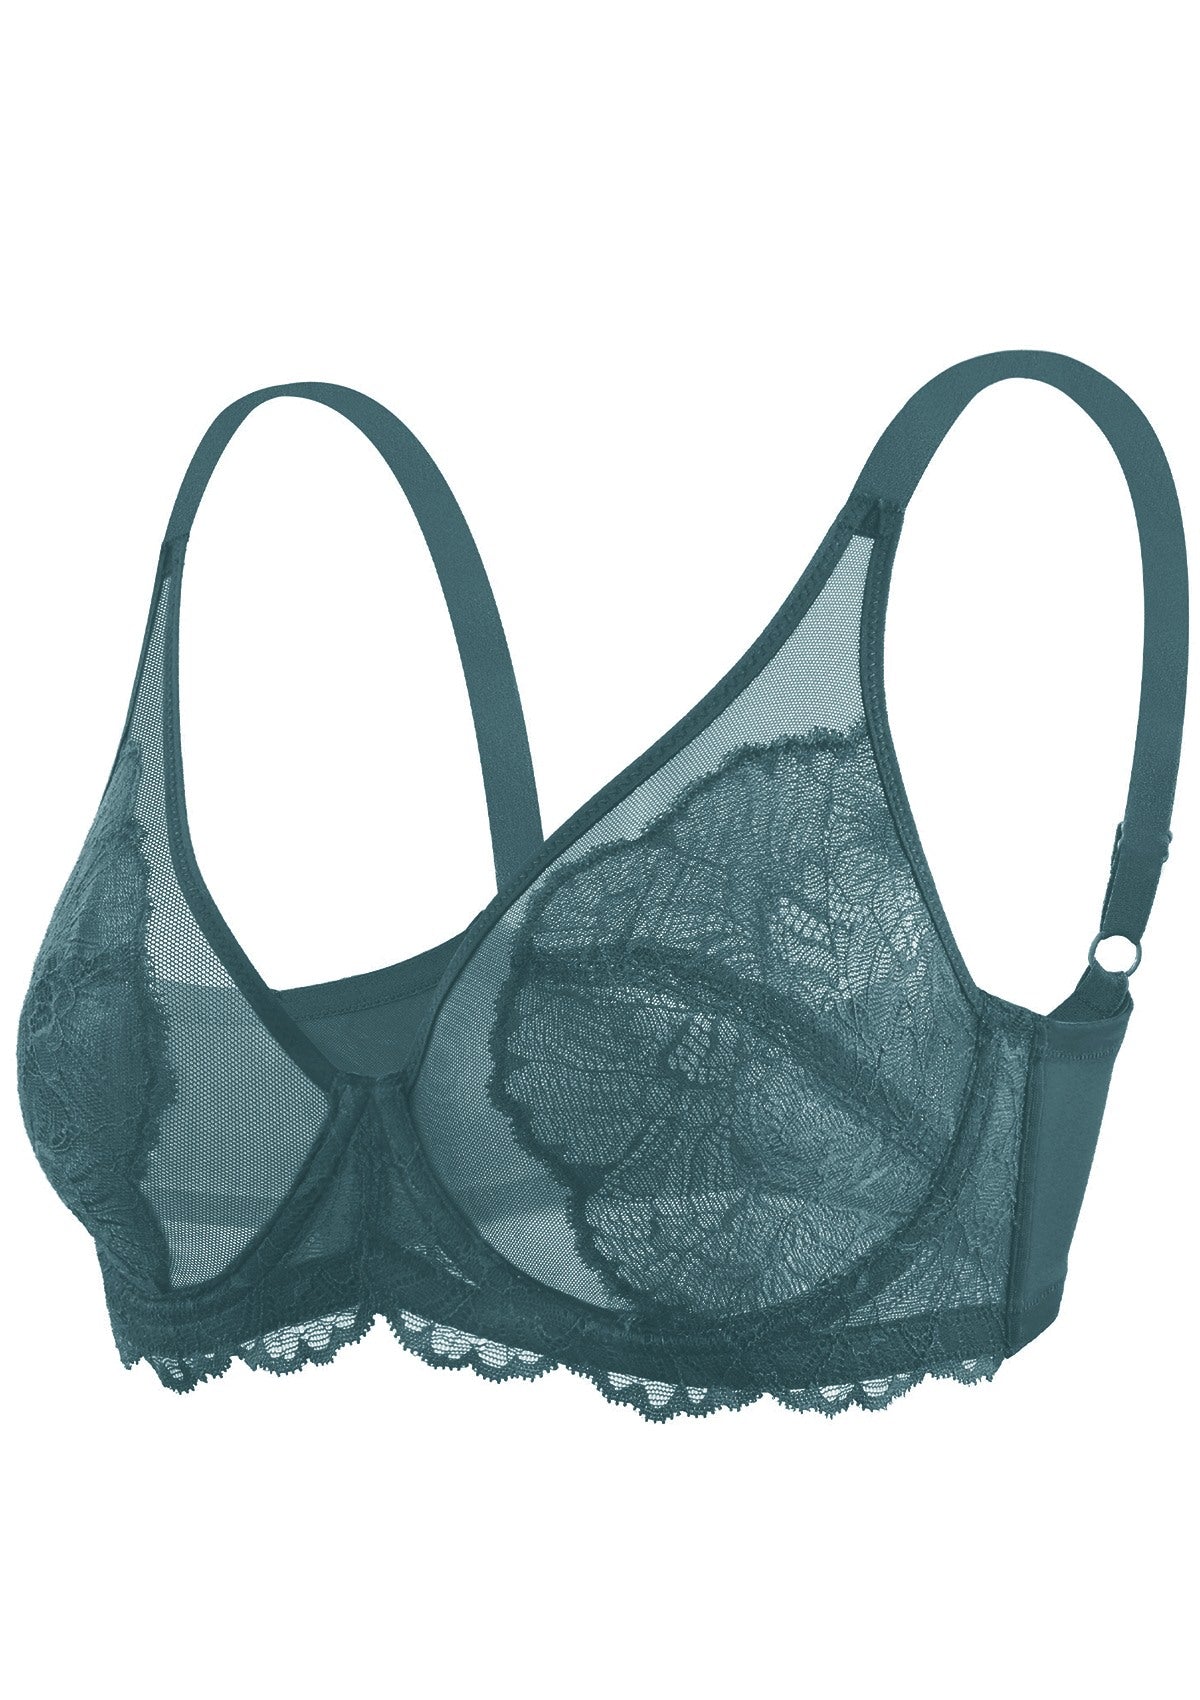 HSIA Blossom Full Figure See-Through Lace Bra For Side And Back Fat - Biscay Blue / 34 / C